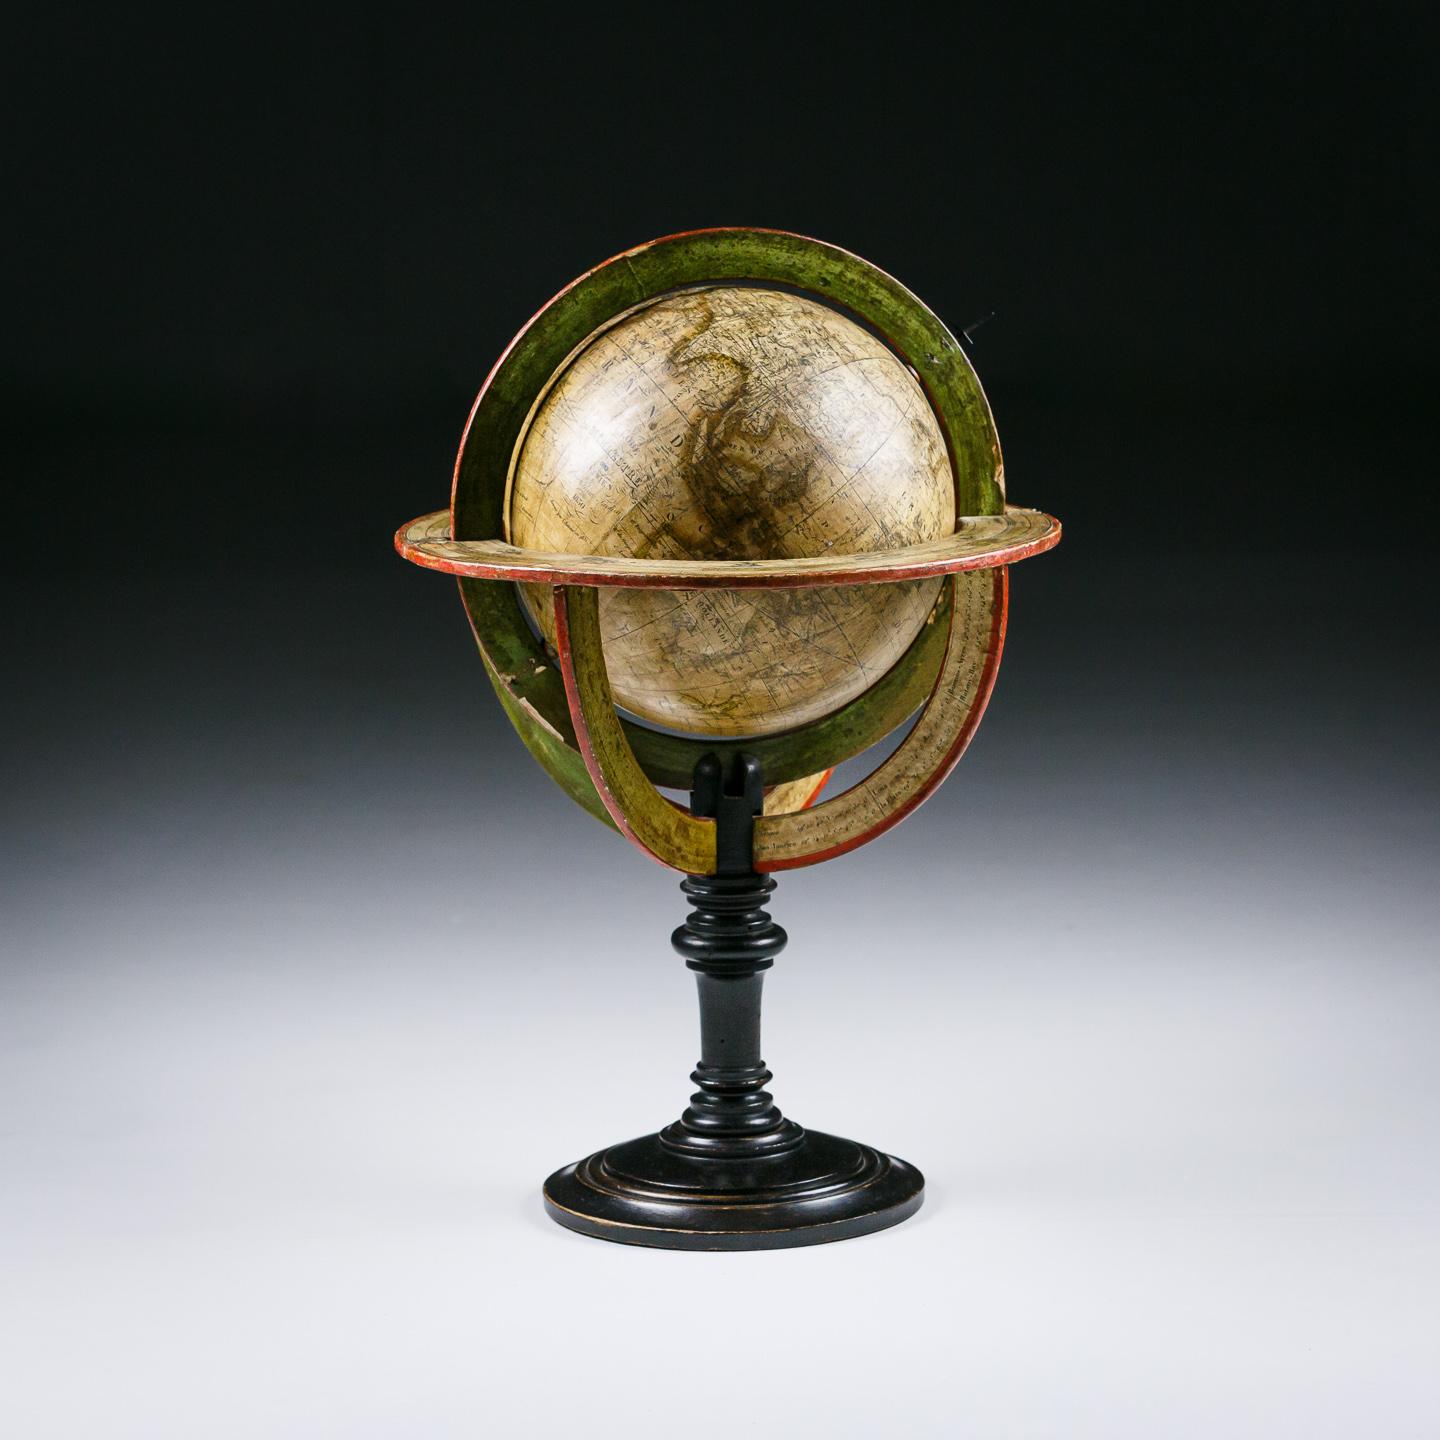 Extraordinary early 19th century globe Untouched original condition. France Circa 1830 Louis Vivien de Saint Martin was Establish in Paris before 1823 when he edited an electoral map. His Universal atlas appeared in 1825. A Geographer and Historian,